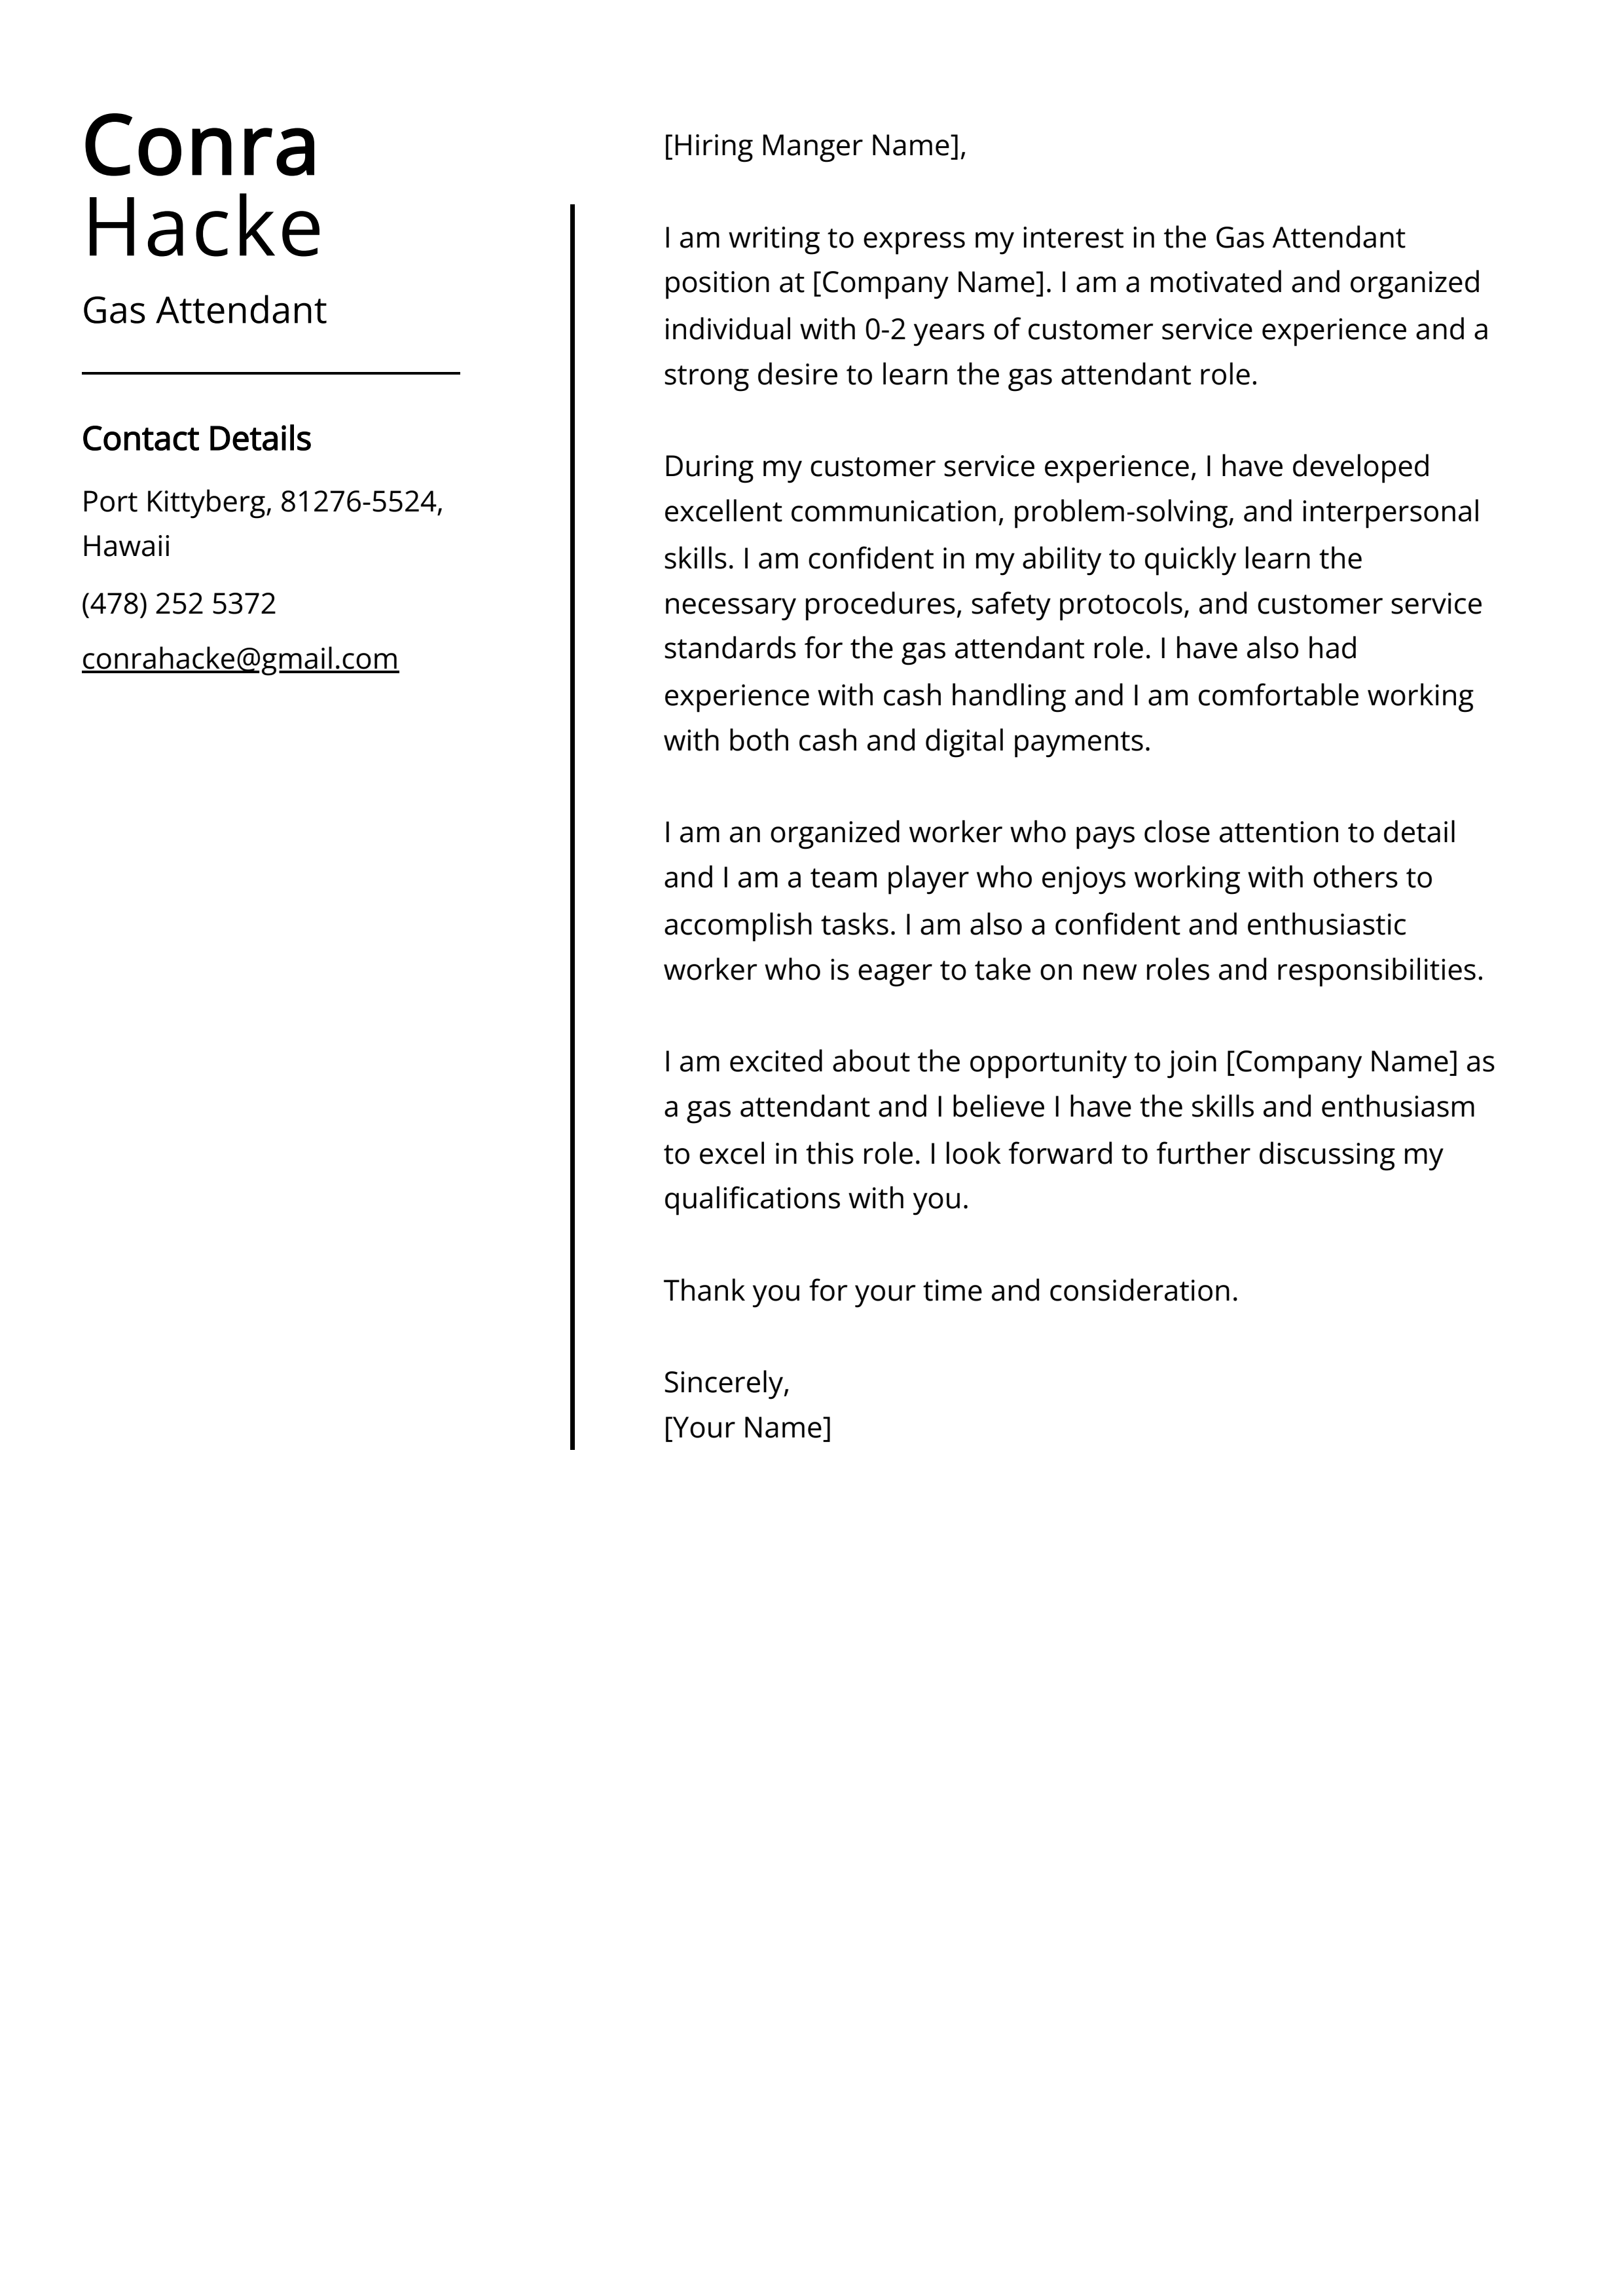 Gas Attendant Cover Letter Example